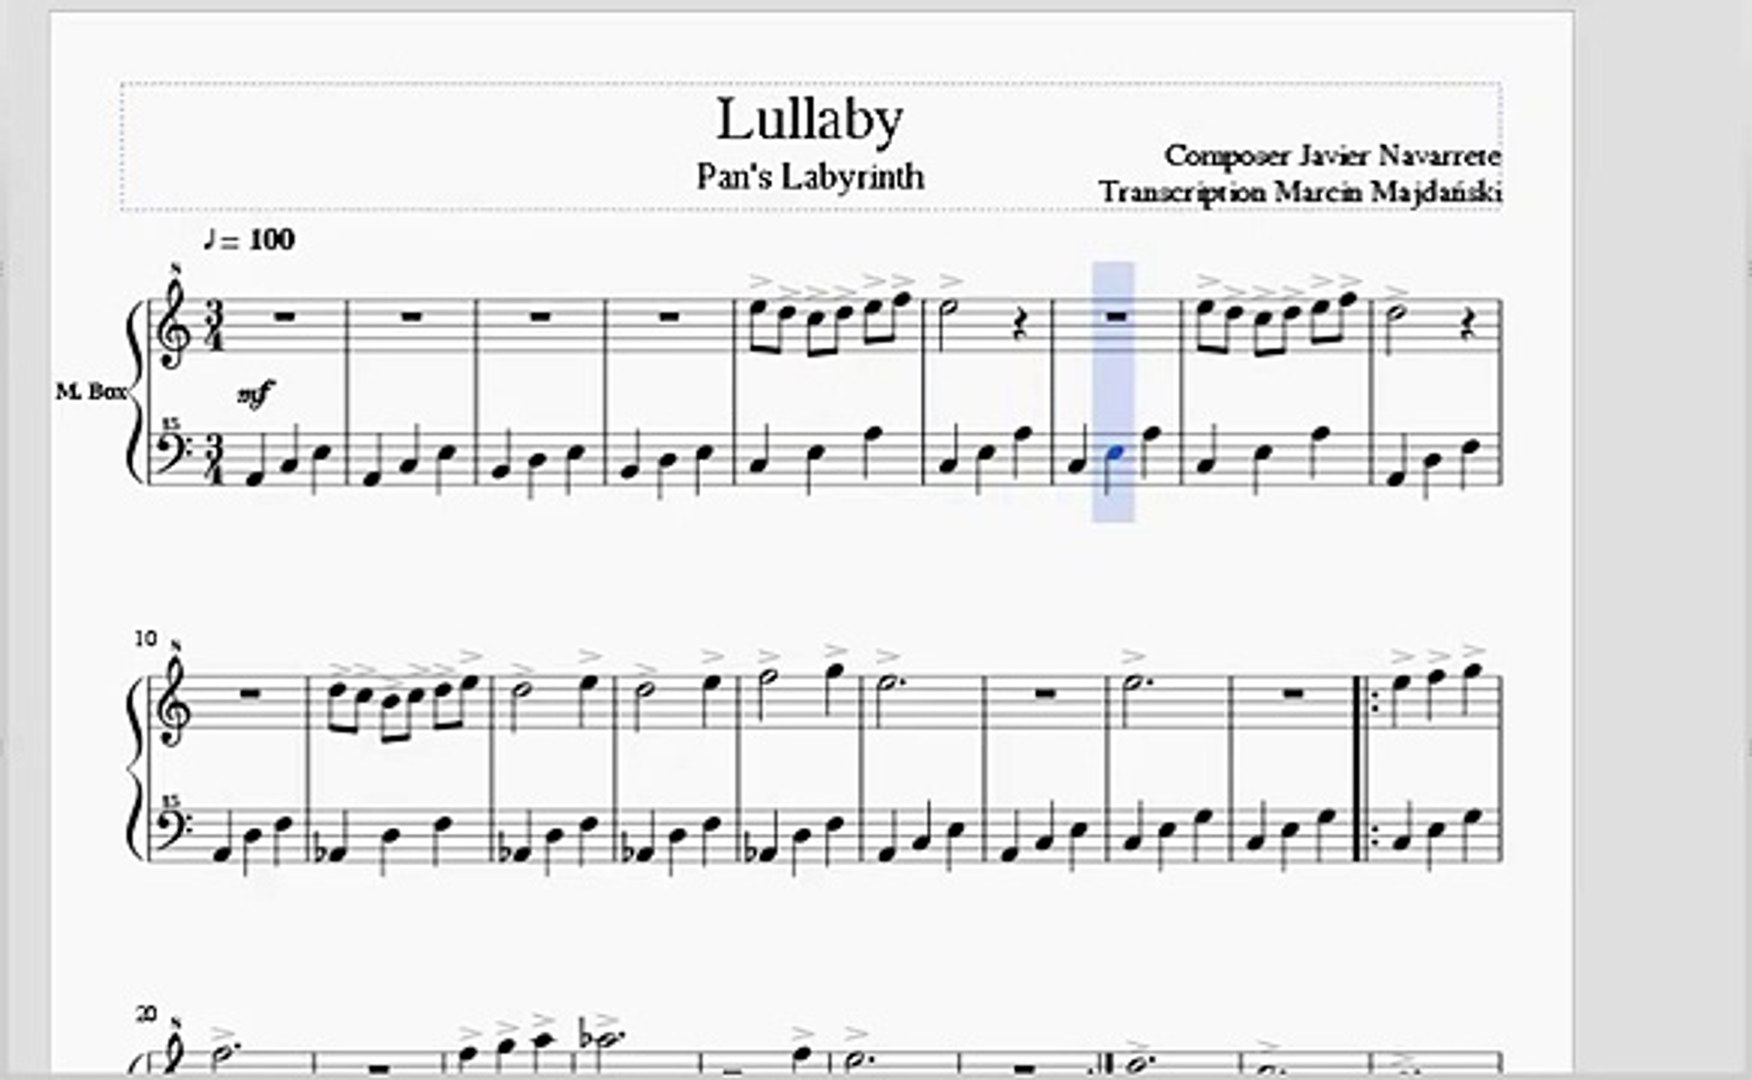 Pan's Labyrinth - Lullaby (Sheet Music) - video Dailymotion